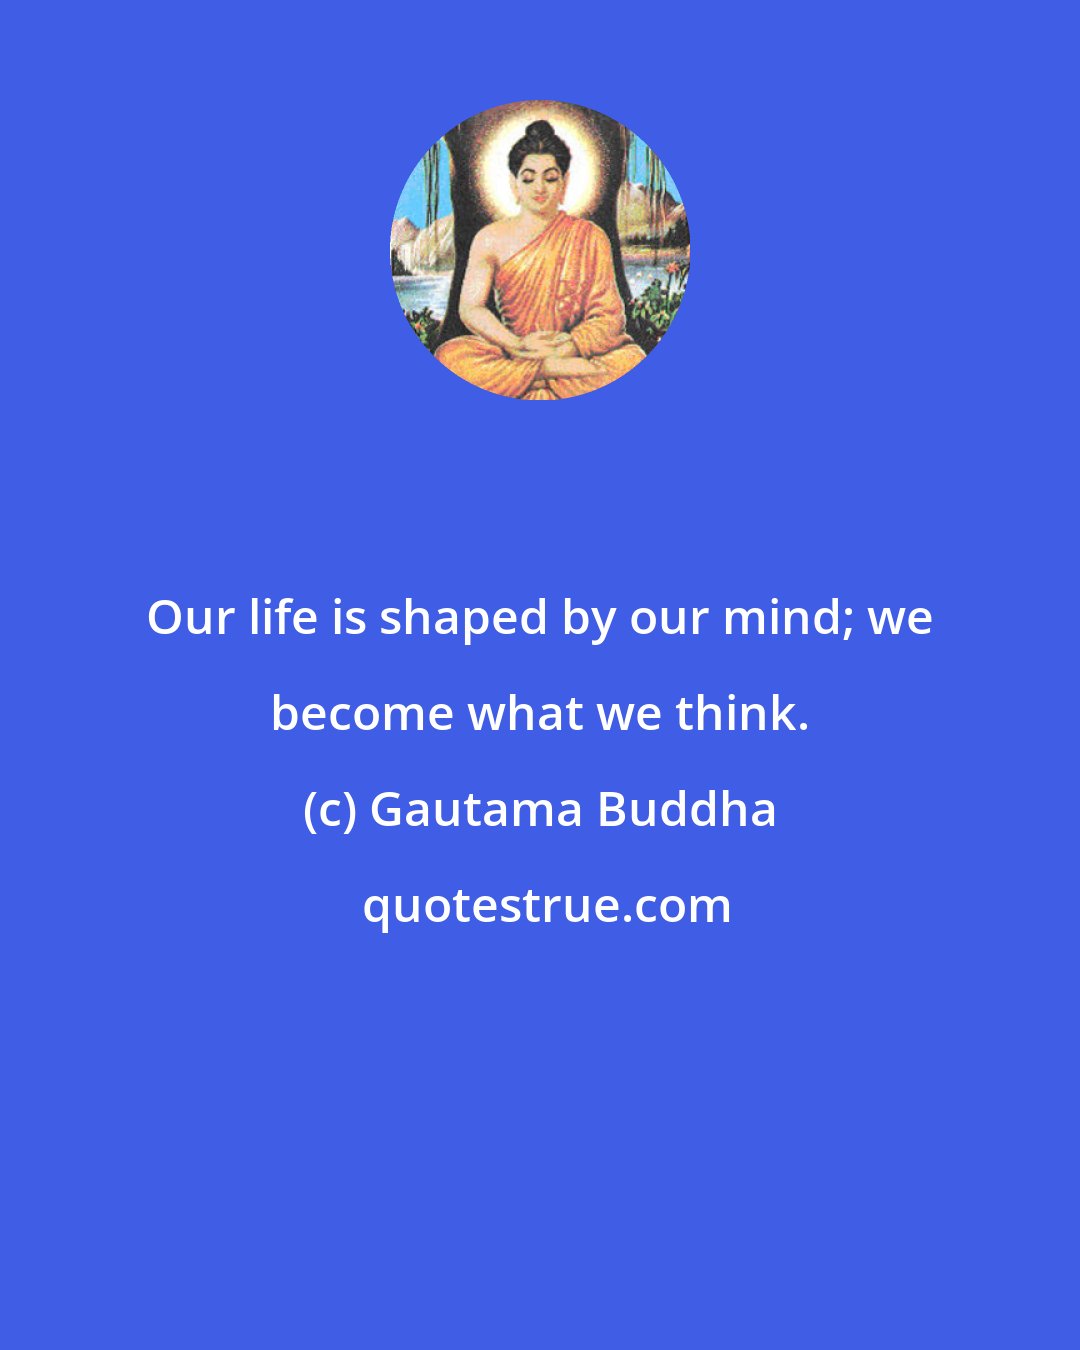 Gautama Buddha: Our life is shaped by our mind; we become what we think.